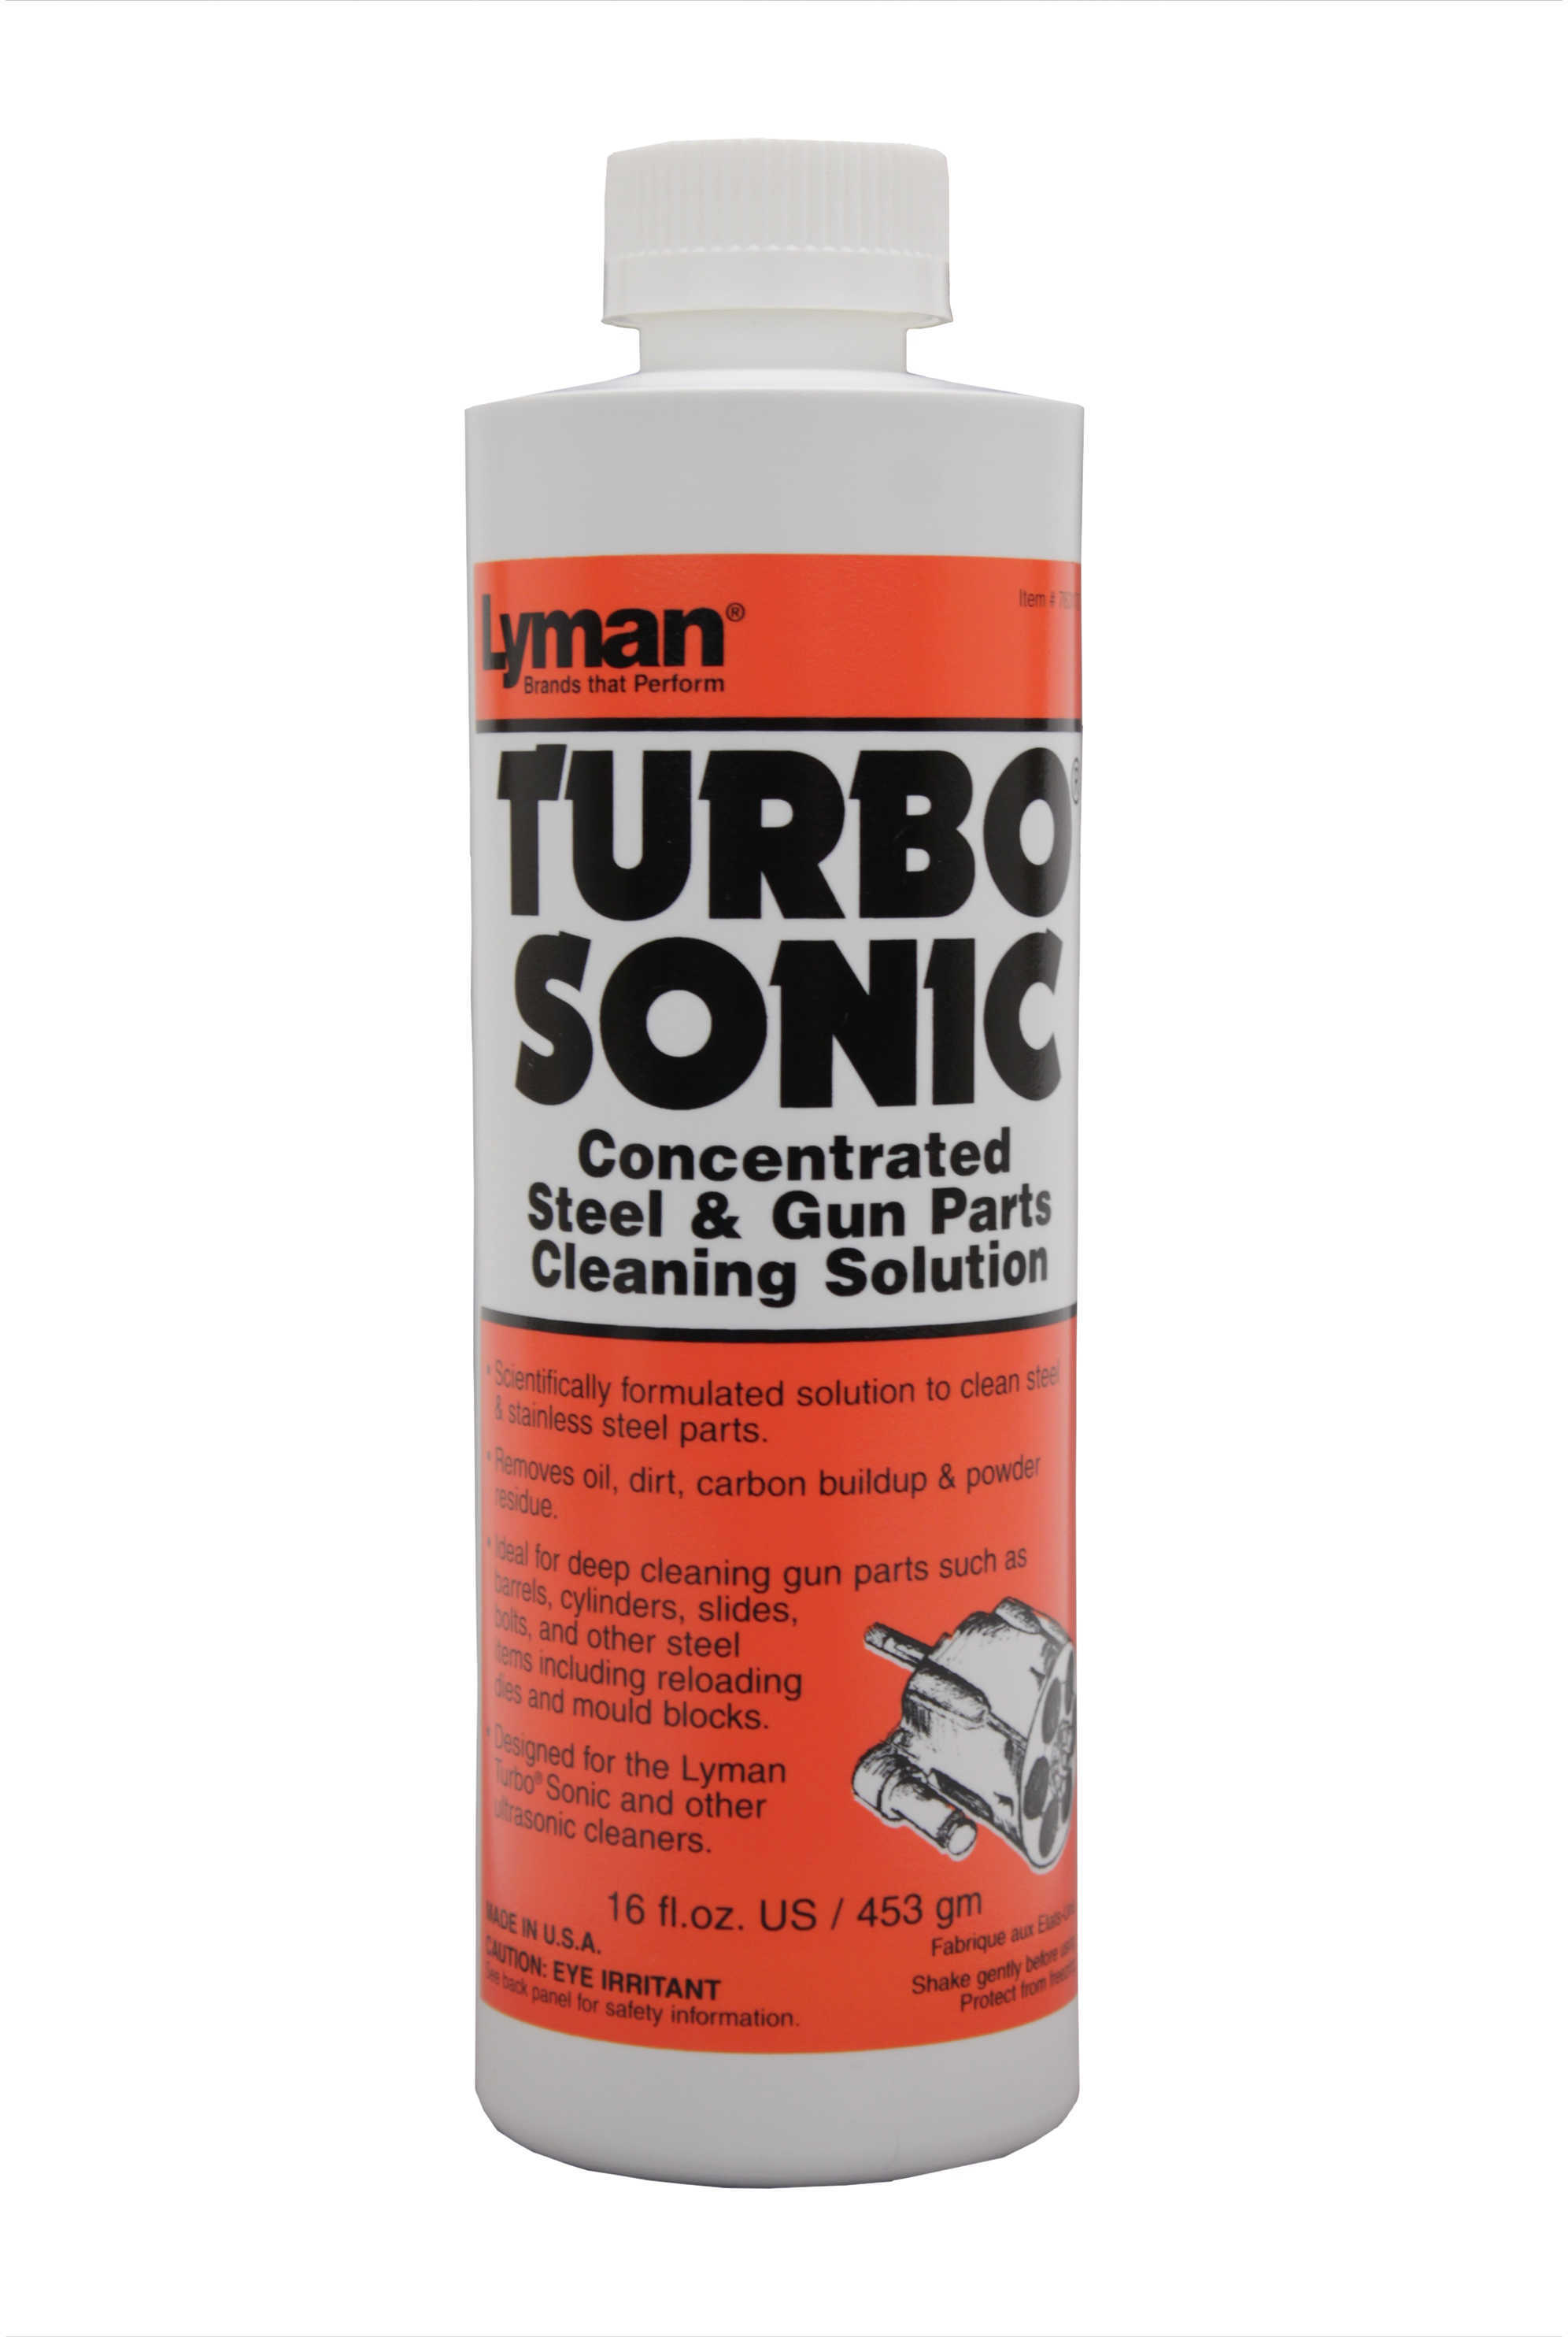 Lyman 7631707 Turbo Sonic Cleaning Solution Gun Parts Cleaner 16 Oz